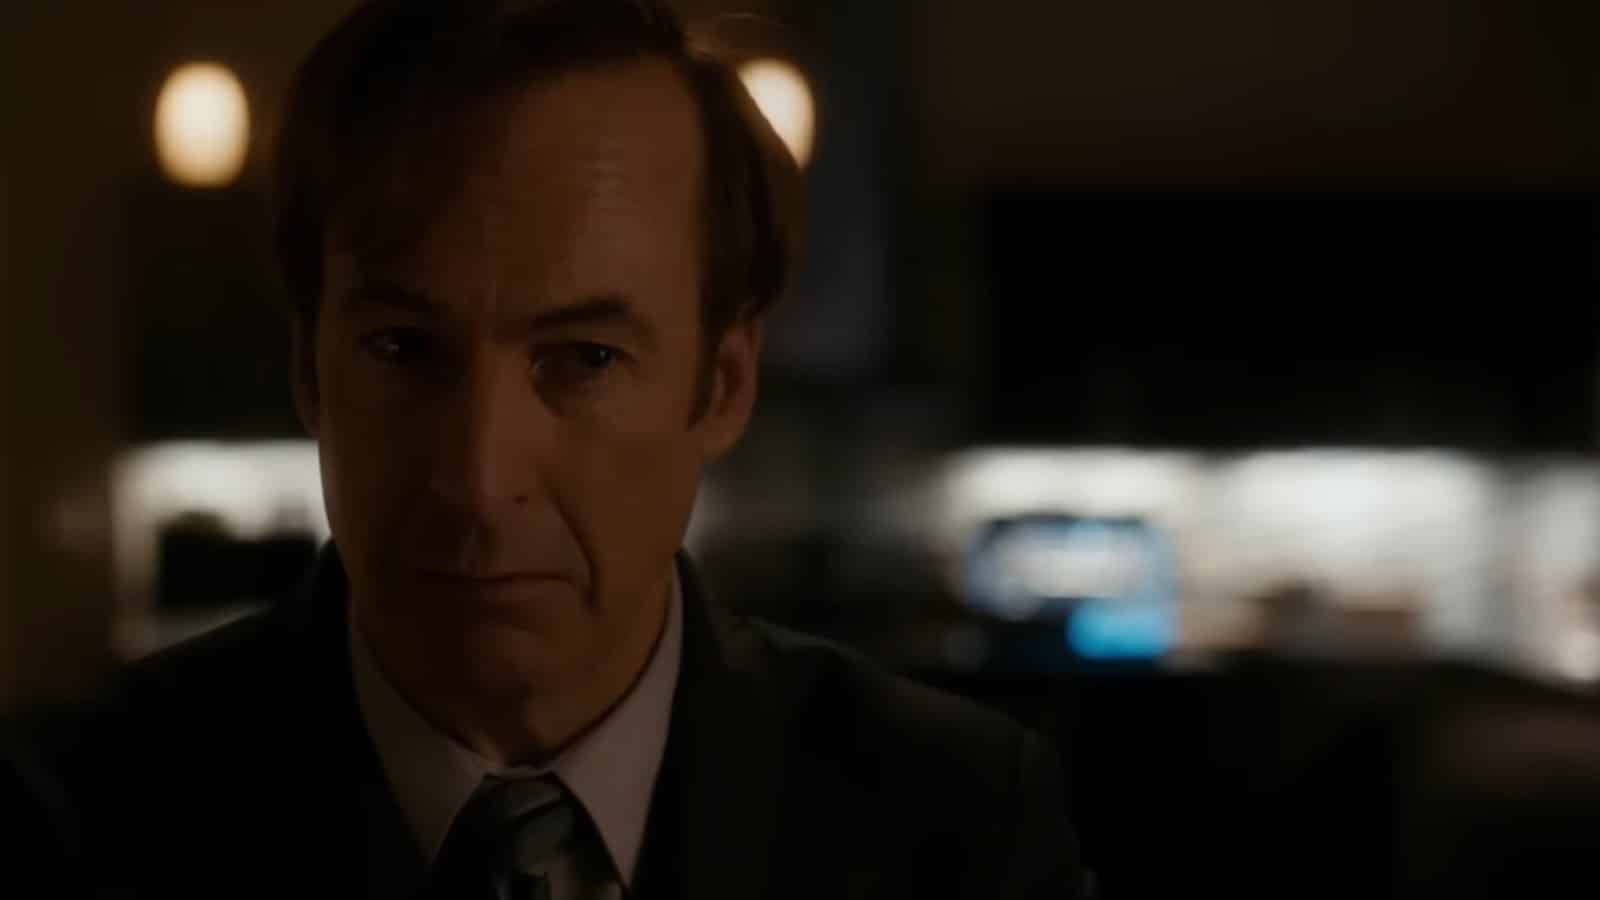 Better Call Saul episode title fuels speculation of Breaking Bad characters  return - Dexerto